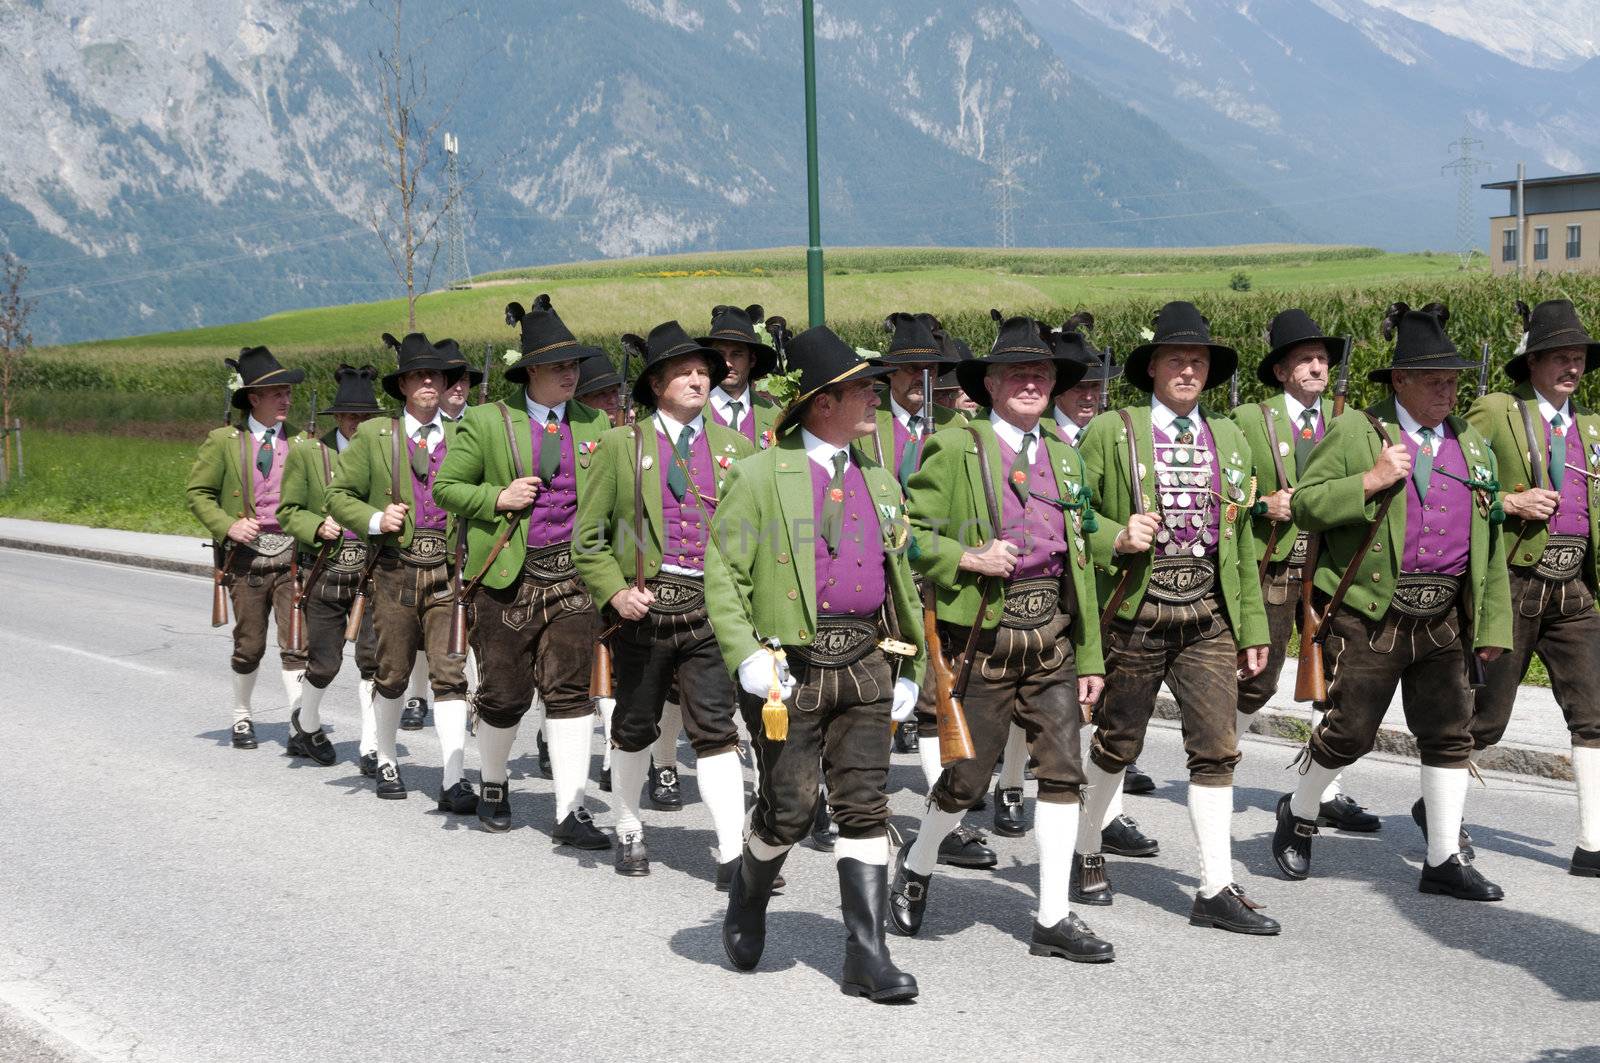 AXAMS,AUSTRIA - AUGUST 15:Unidentified people making music in procession to the church on Maria Ascension,on August 15, 2012 in Axams, Austria. Maria Ascension is the annual christian celebration in Axam